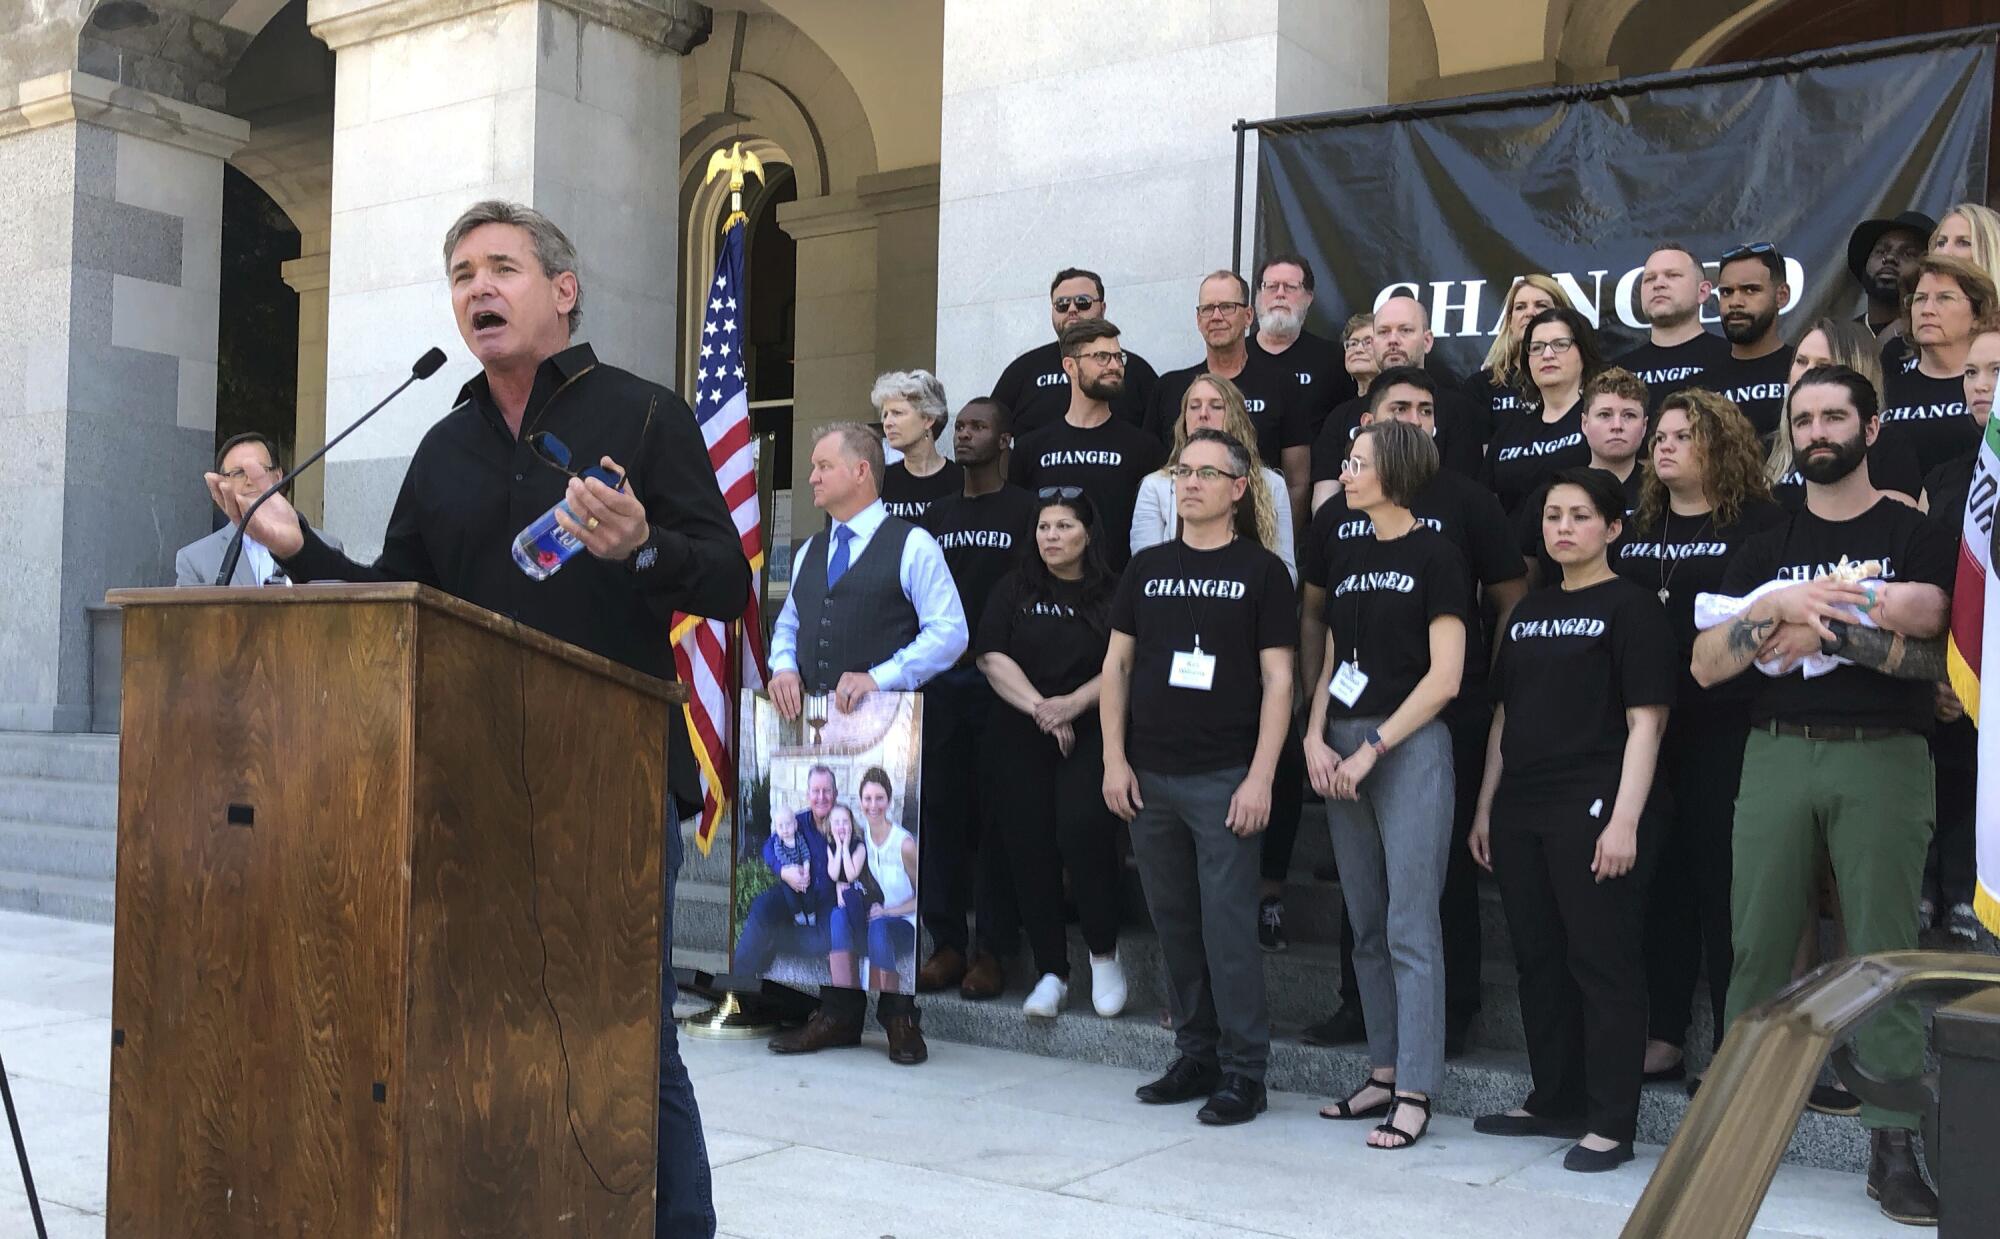 A man speaks at a lectern while people dressed in matching shirts stand behind him.